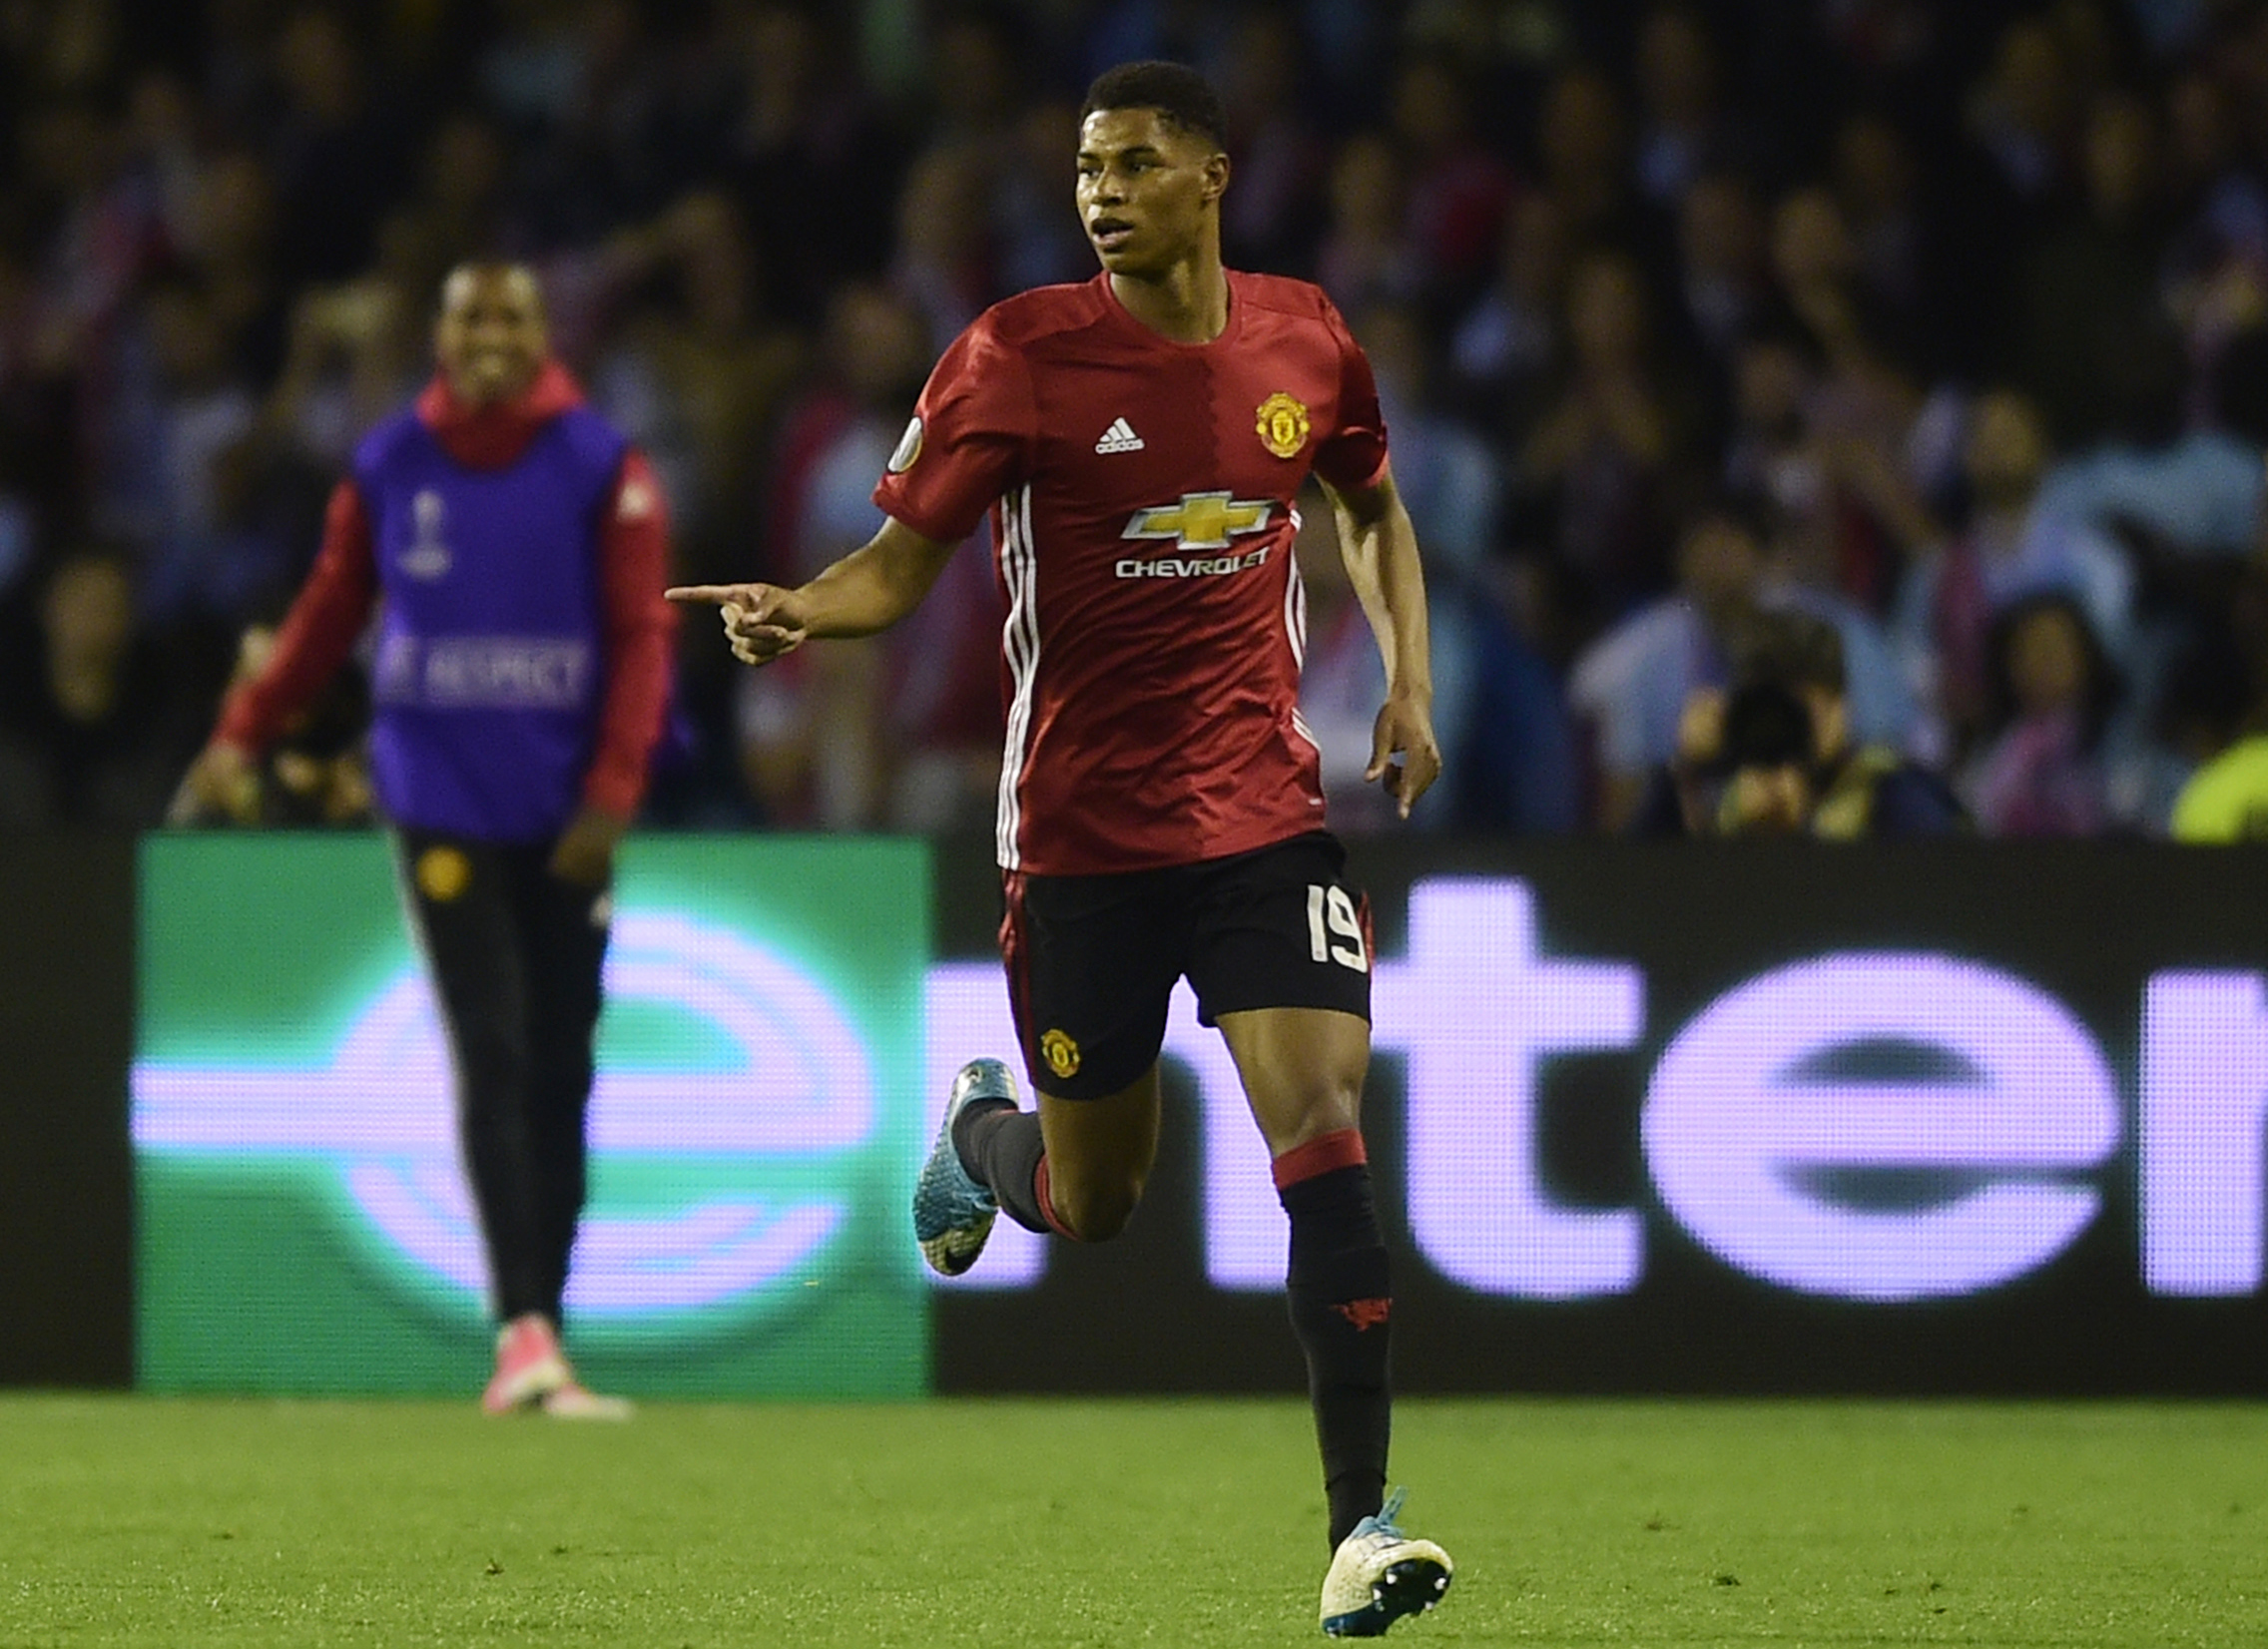 Manchester United's forward Marcus Rashford celebrates after scoring the opener during their UEFA Europa League semi final first leg football match RC Celta de Vigo vs Manchester United FC at the Balaidos stadium in Vigo on May 4, 2017.
Manchester won 1-0. / AFP PHOTO / MIGUEL RIOPA        (Photo credit should read MIGUEL RIOPA/AFP/Getty Images)